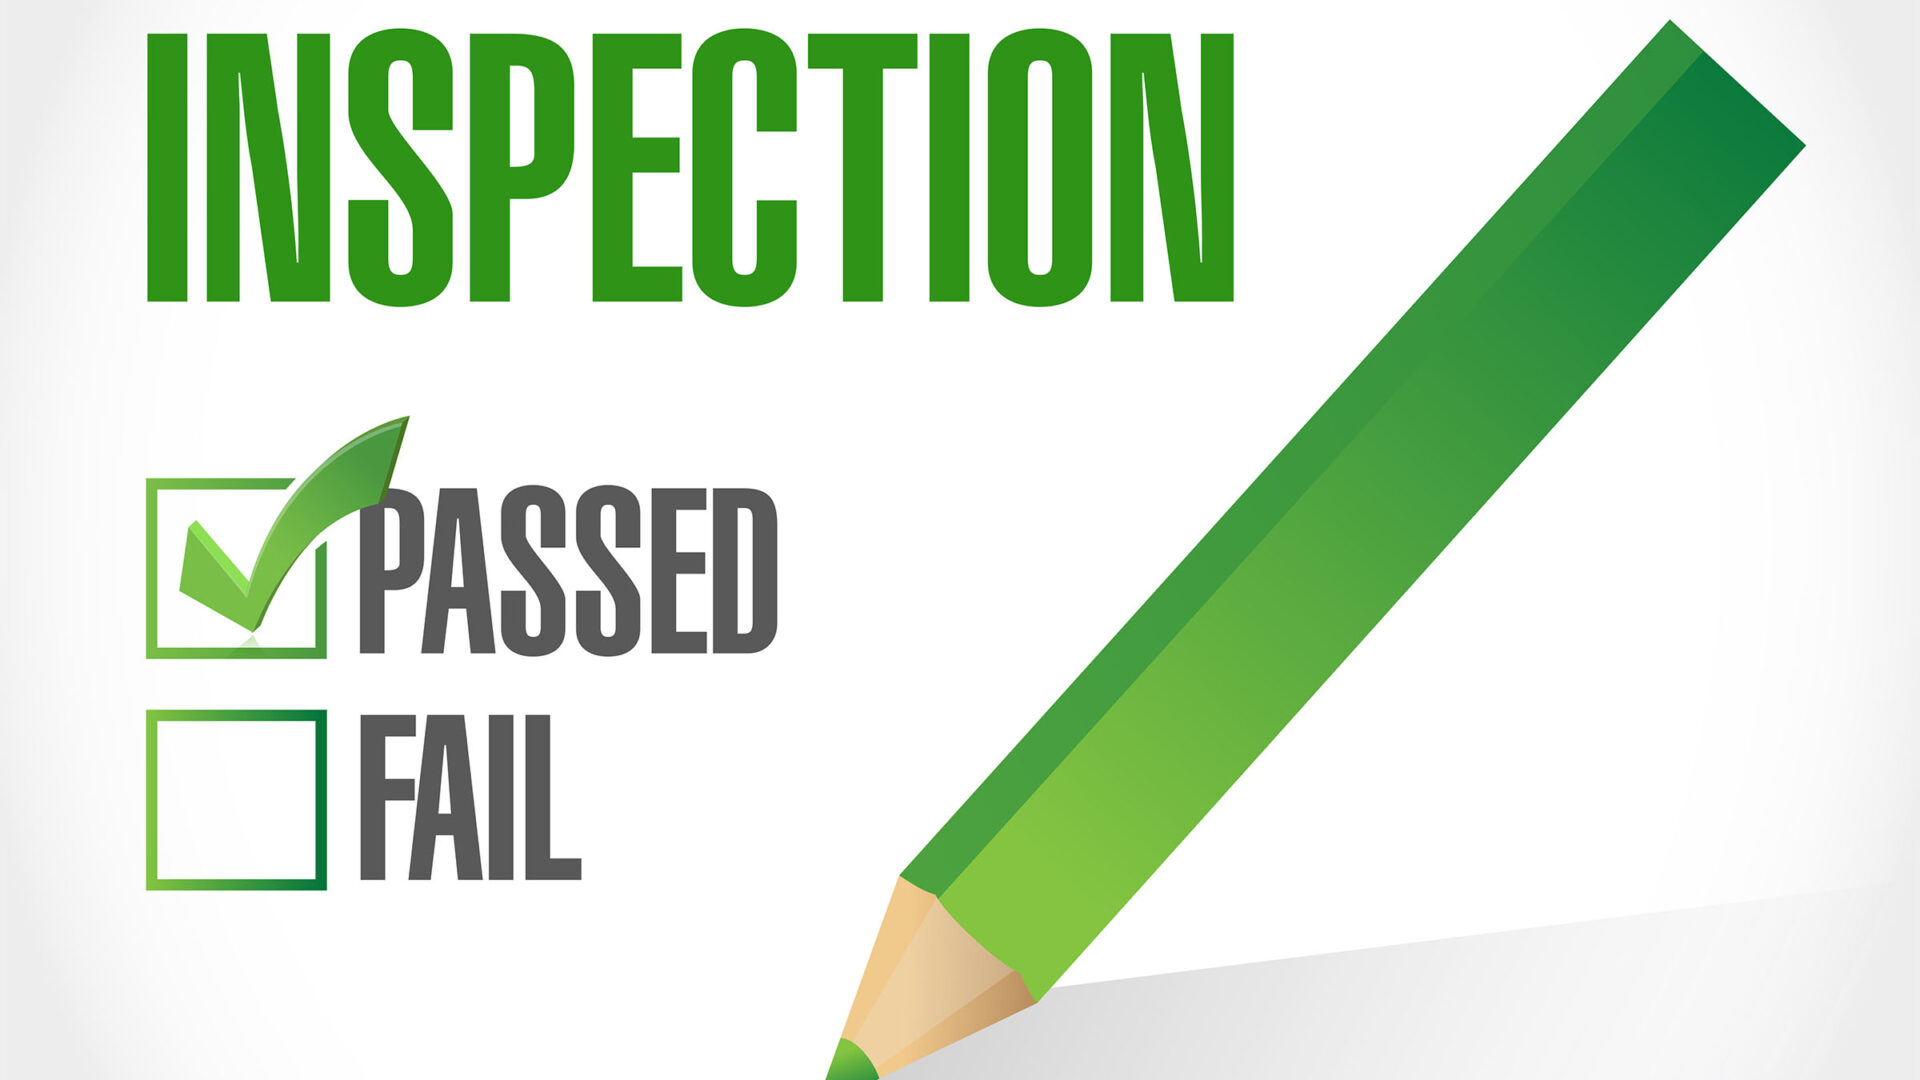 passed inspection check list illustration design over a white background